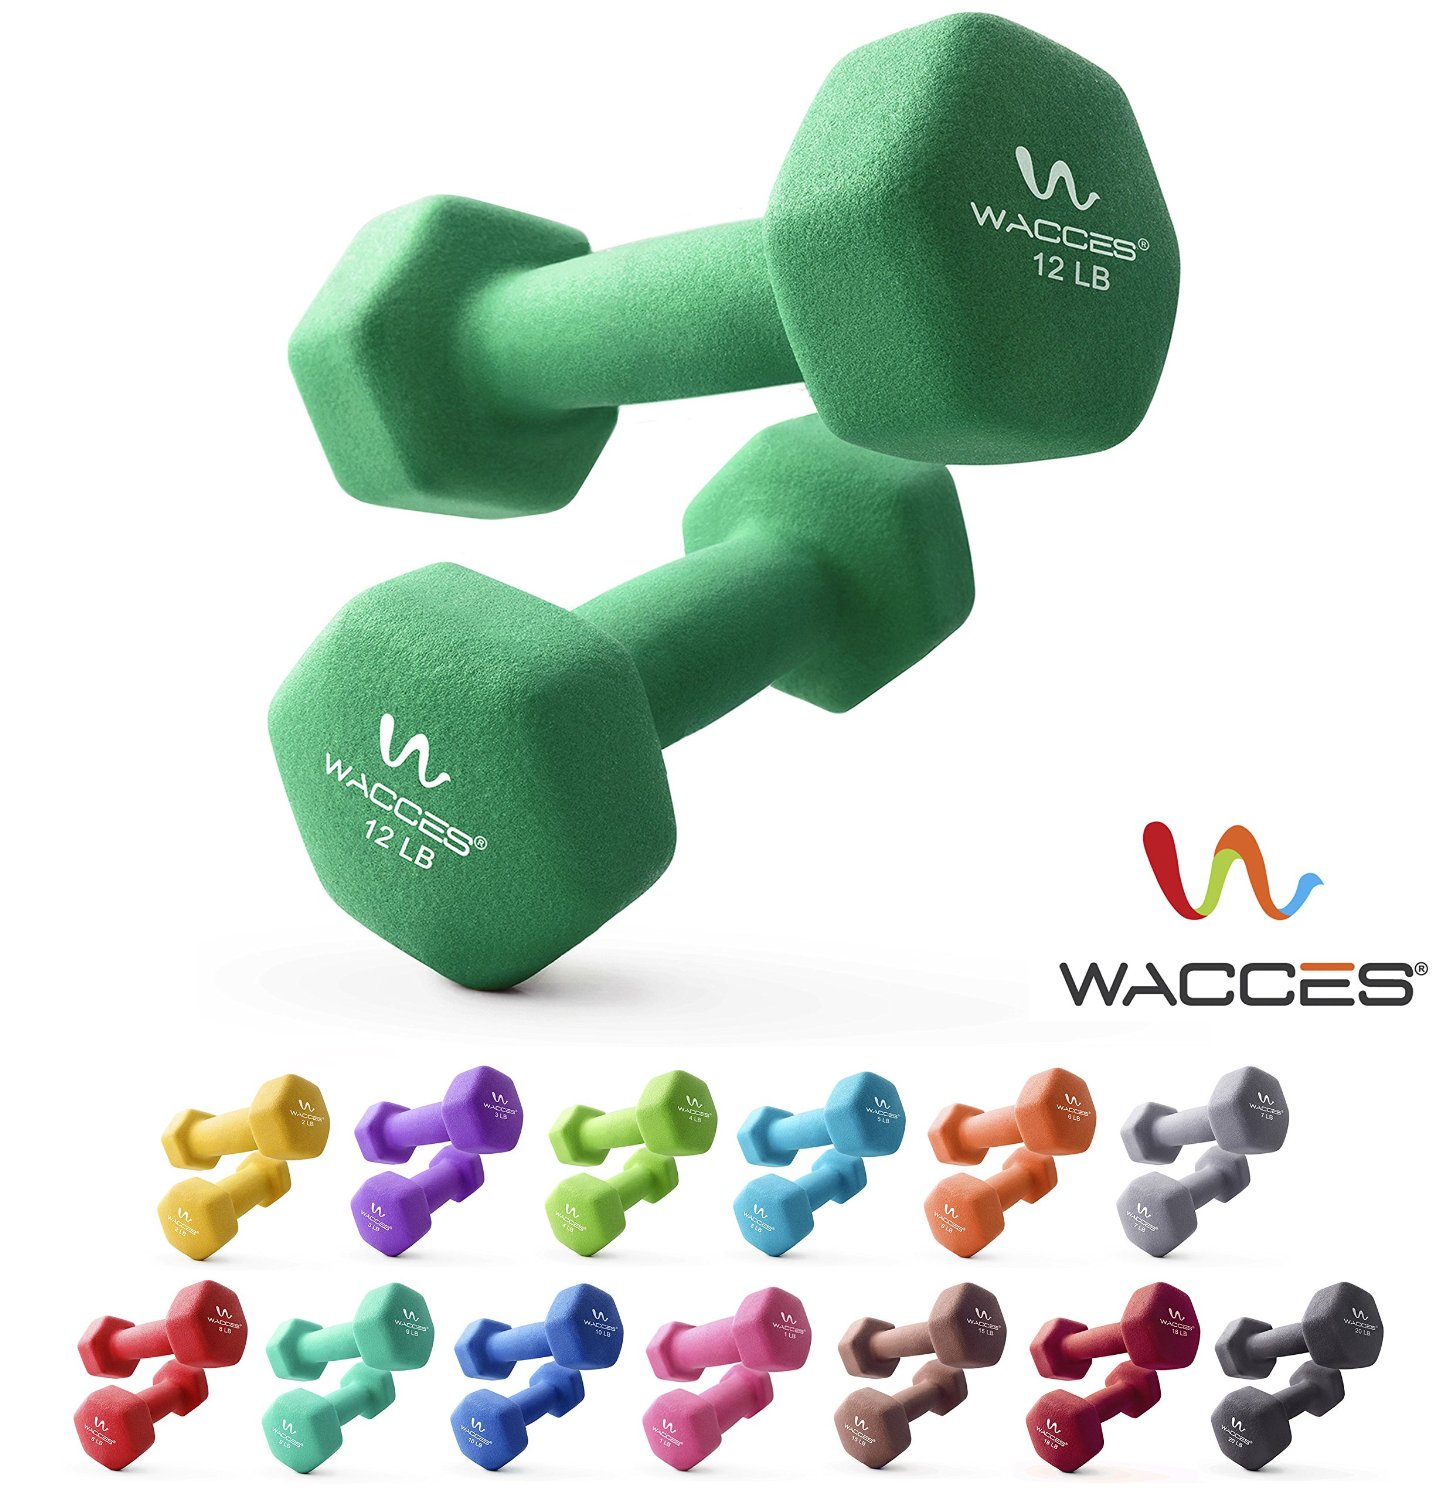 Wacces Neoprene Dipped Coated Set of 2 Dumbbells Hand Weights Sets